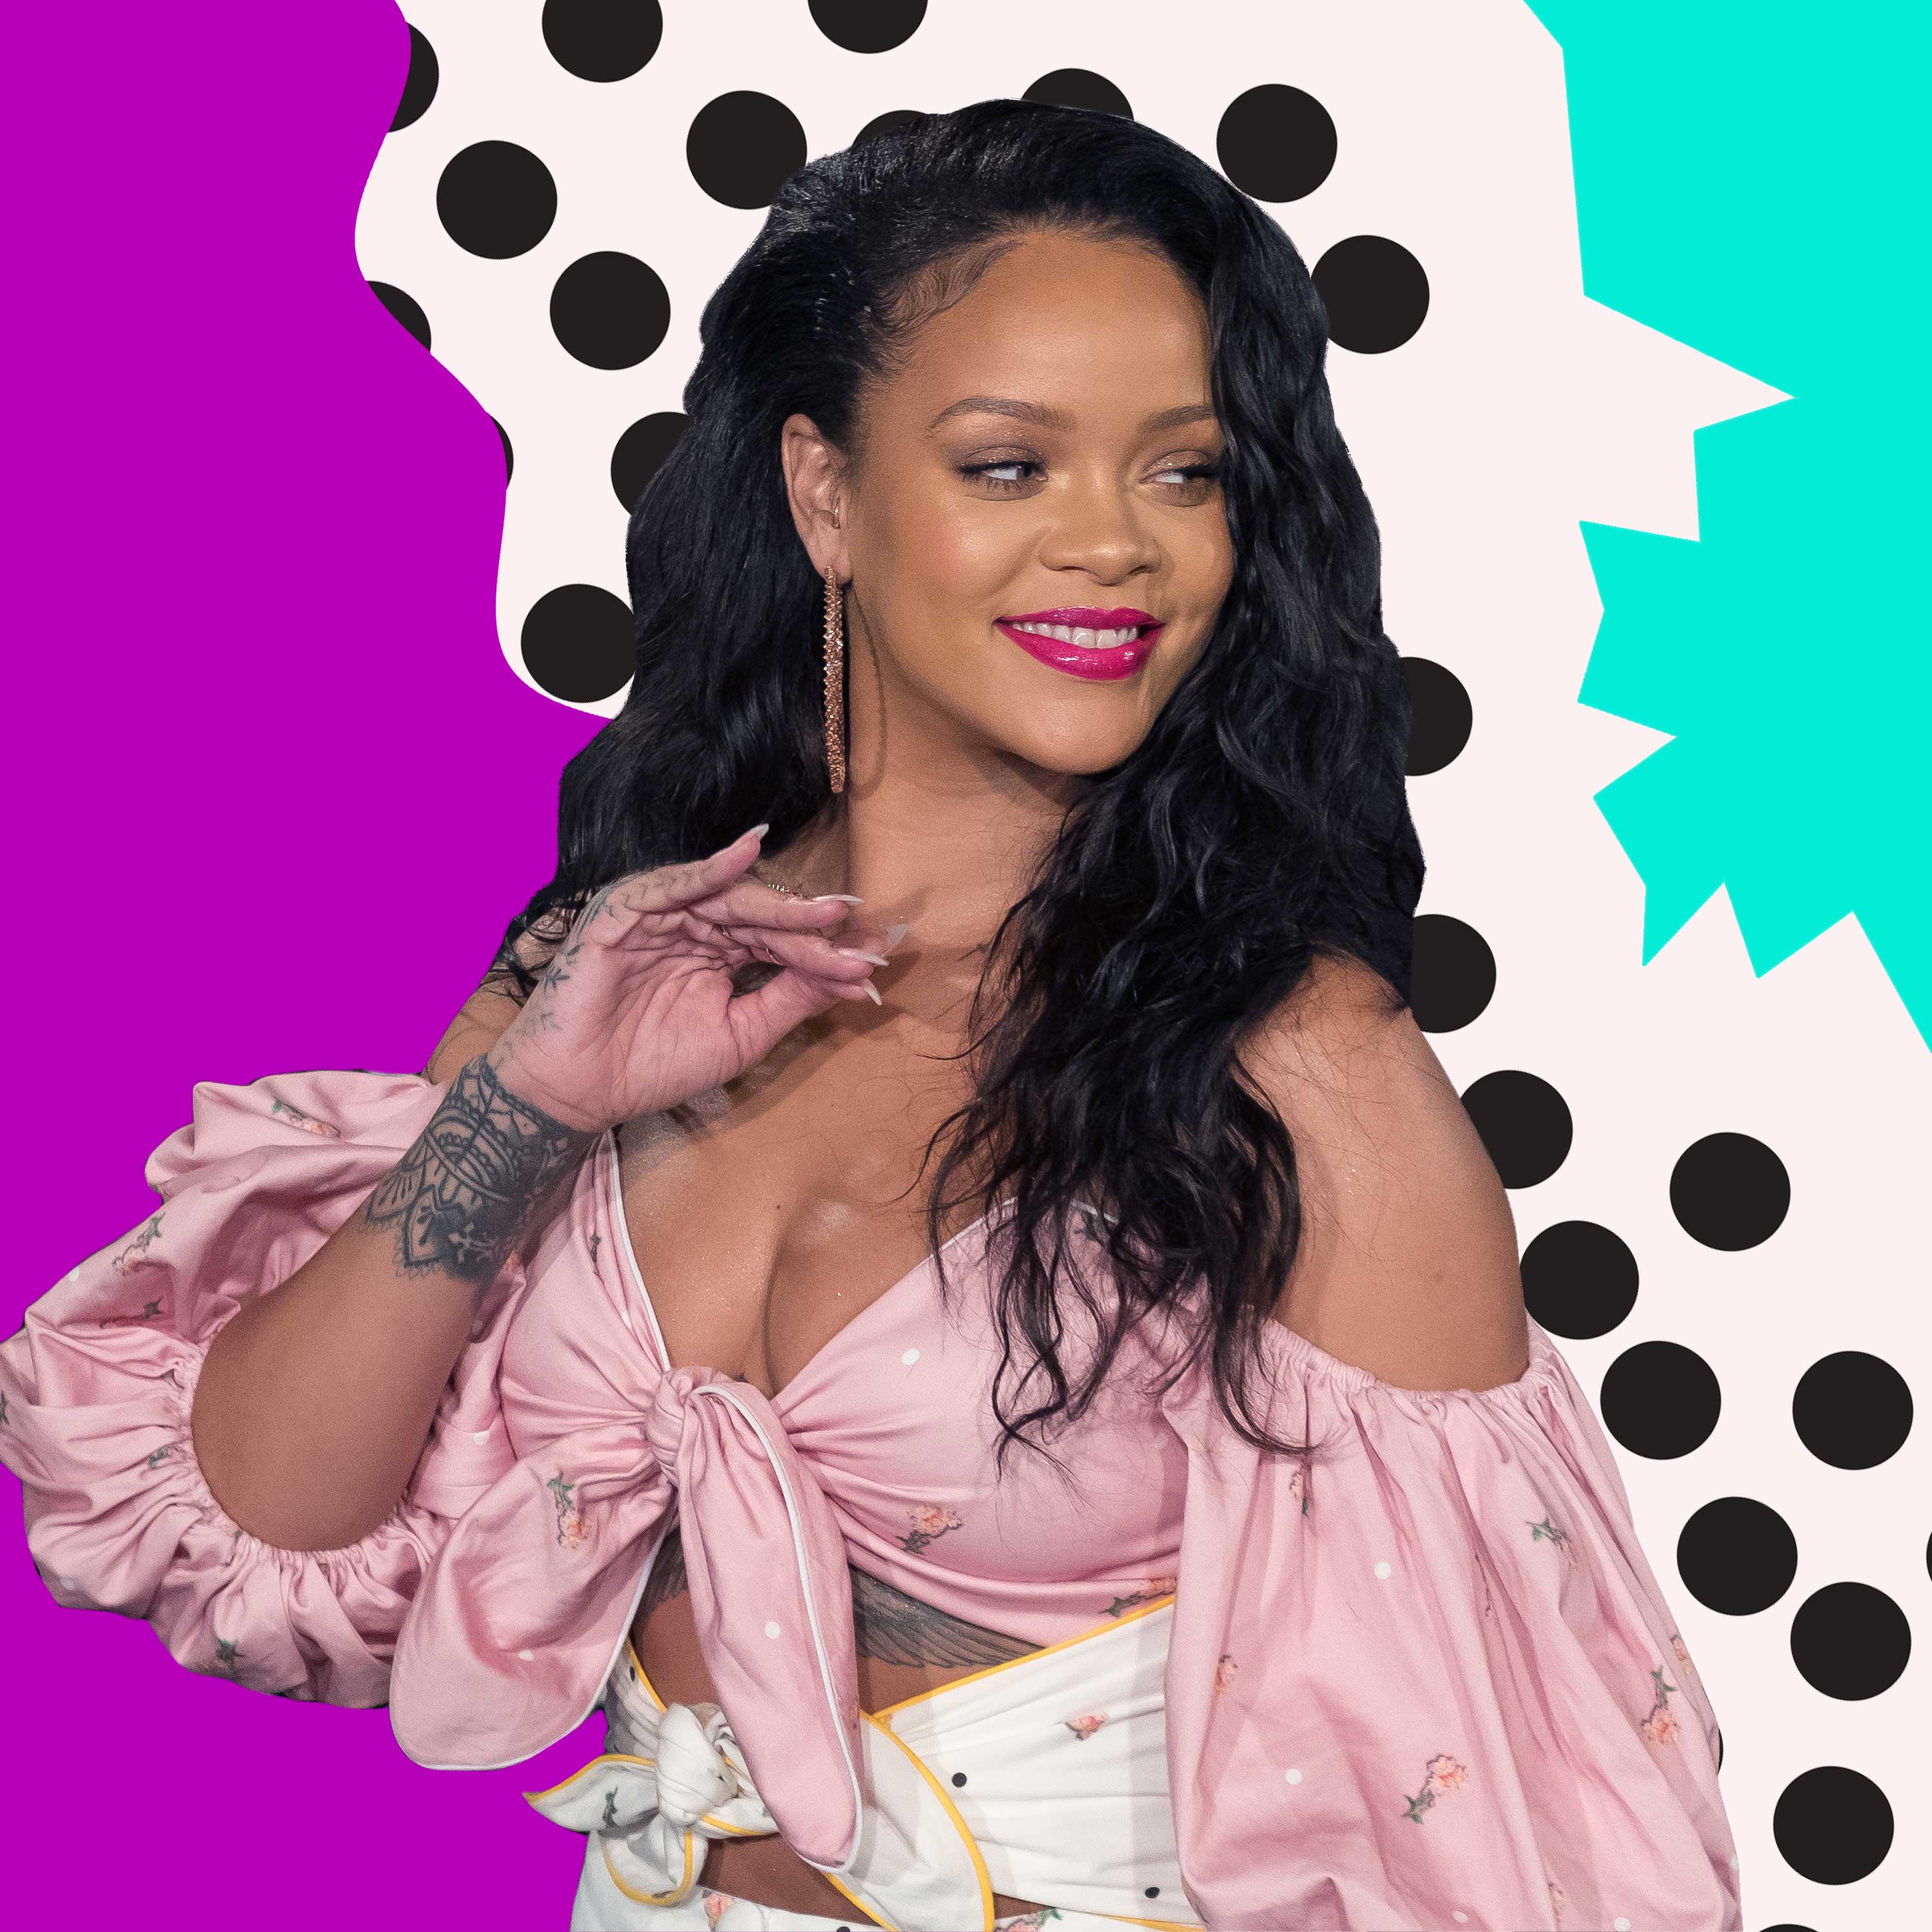 Rihanna's New Fenty Mattemoiselle Lipstick is Now Available! Here's What You Need to Know
